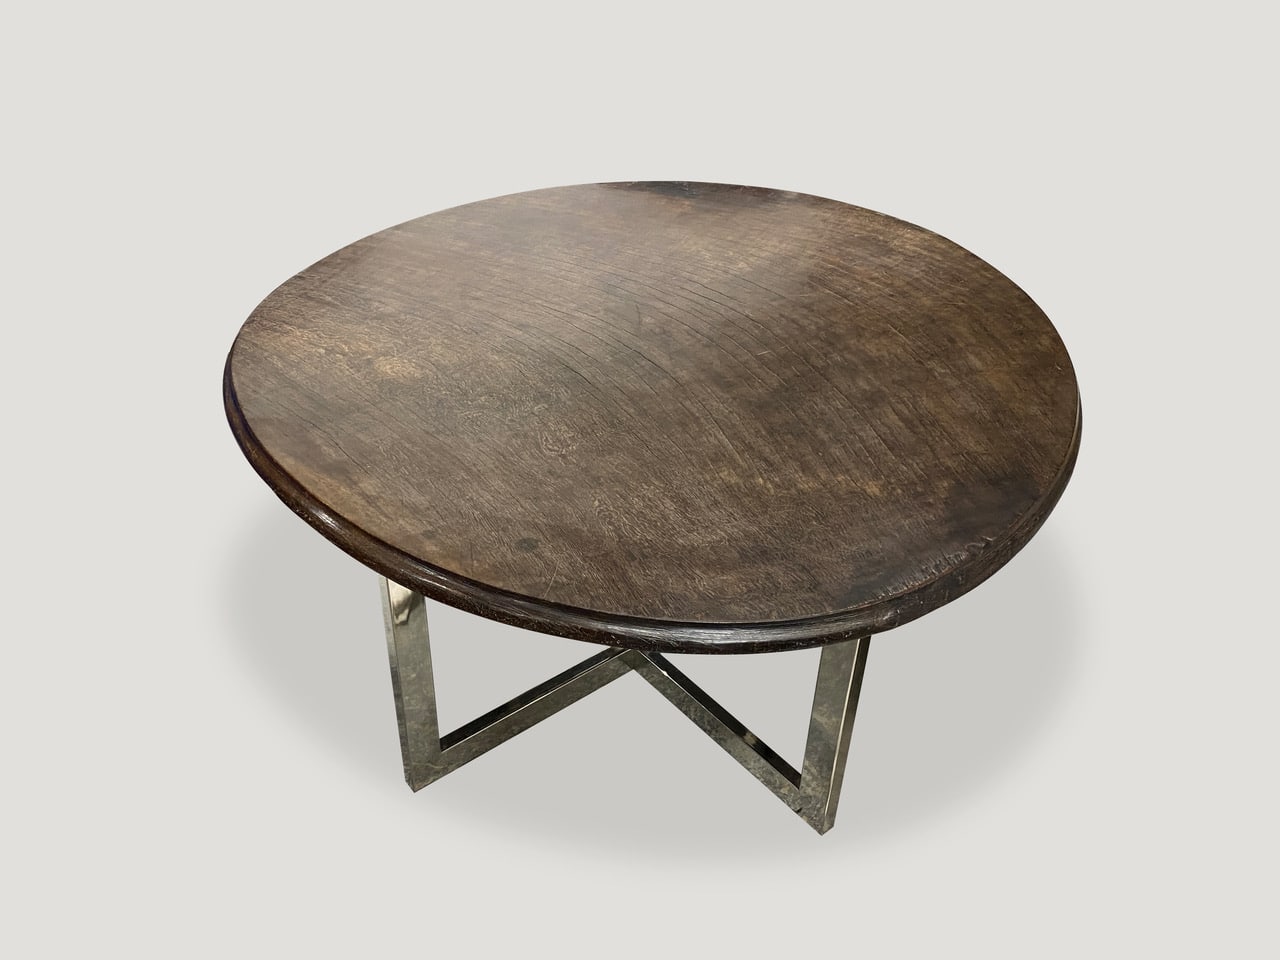 Ulin wood cocktail table